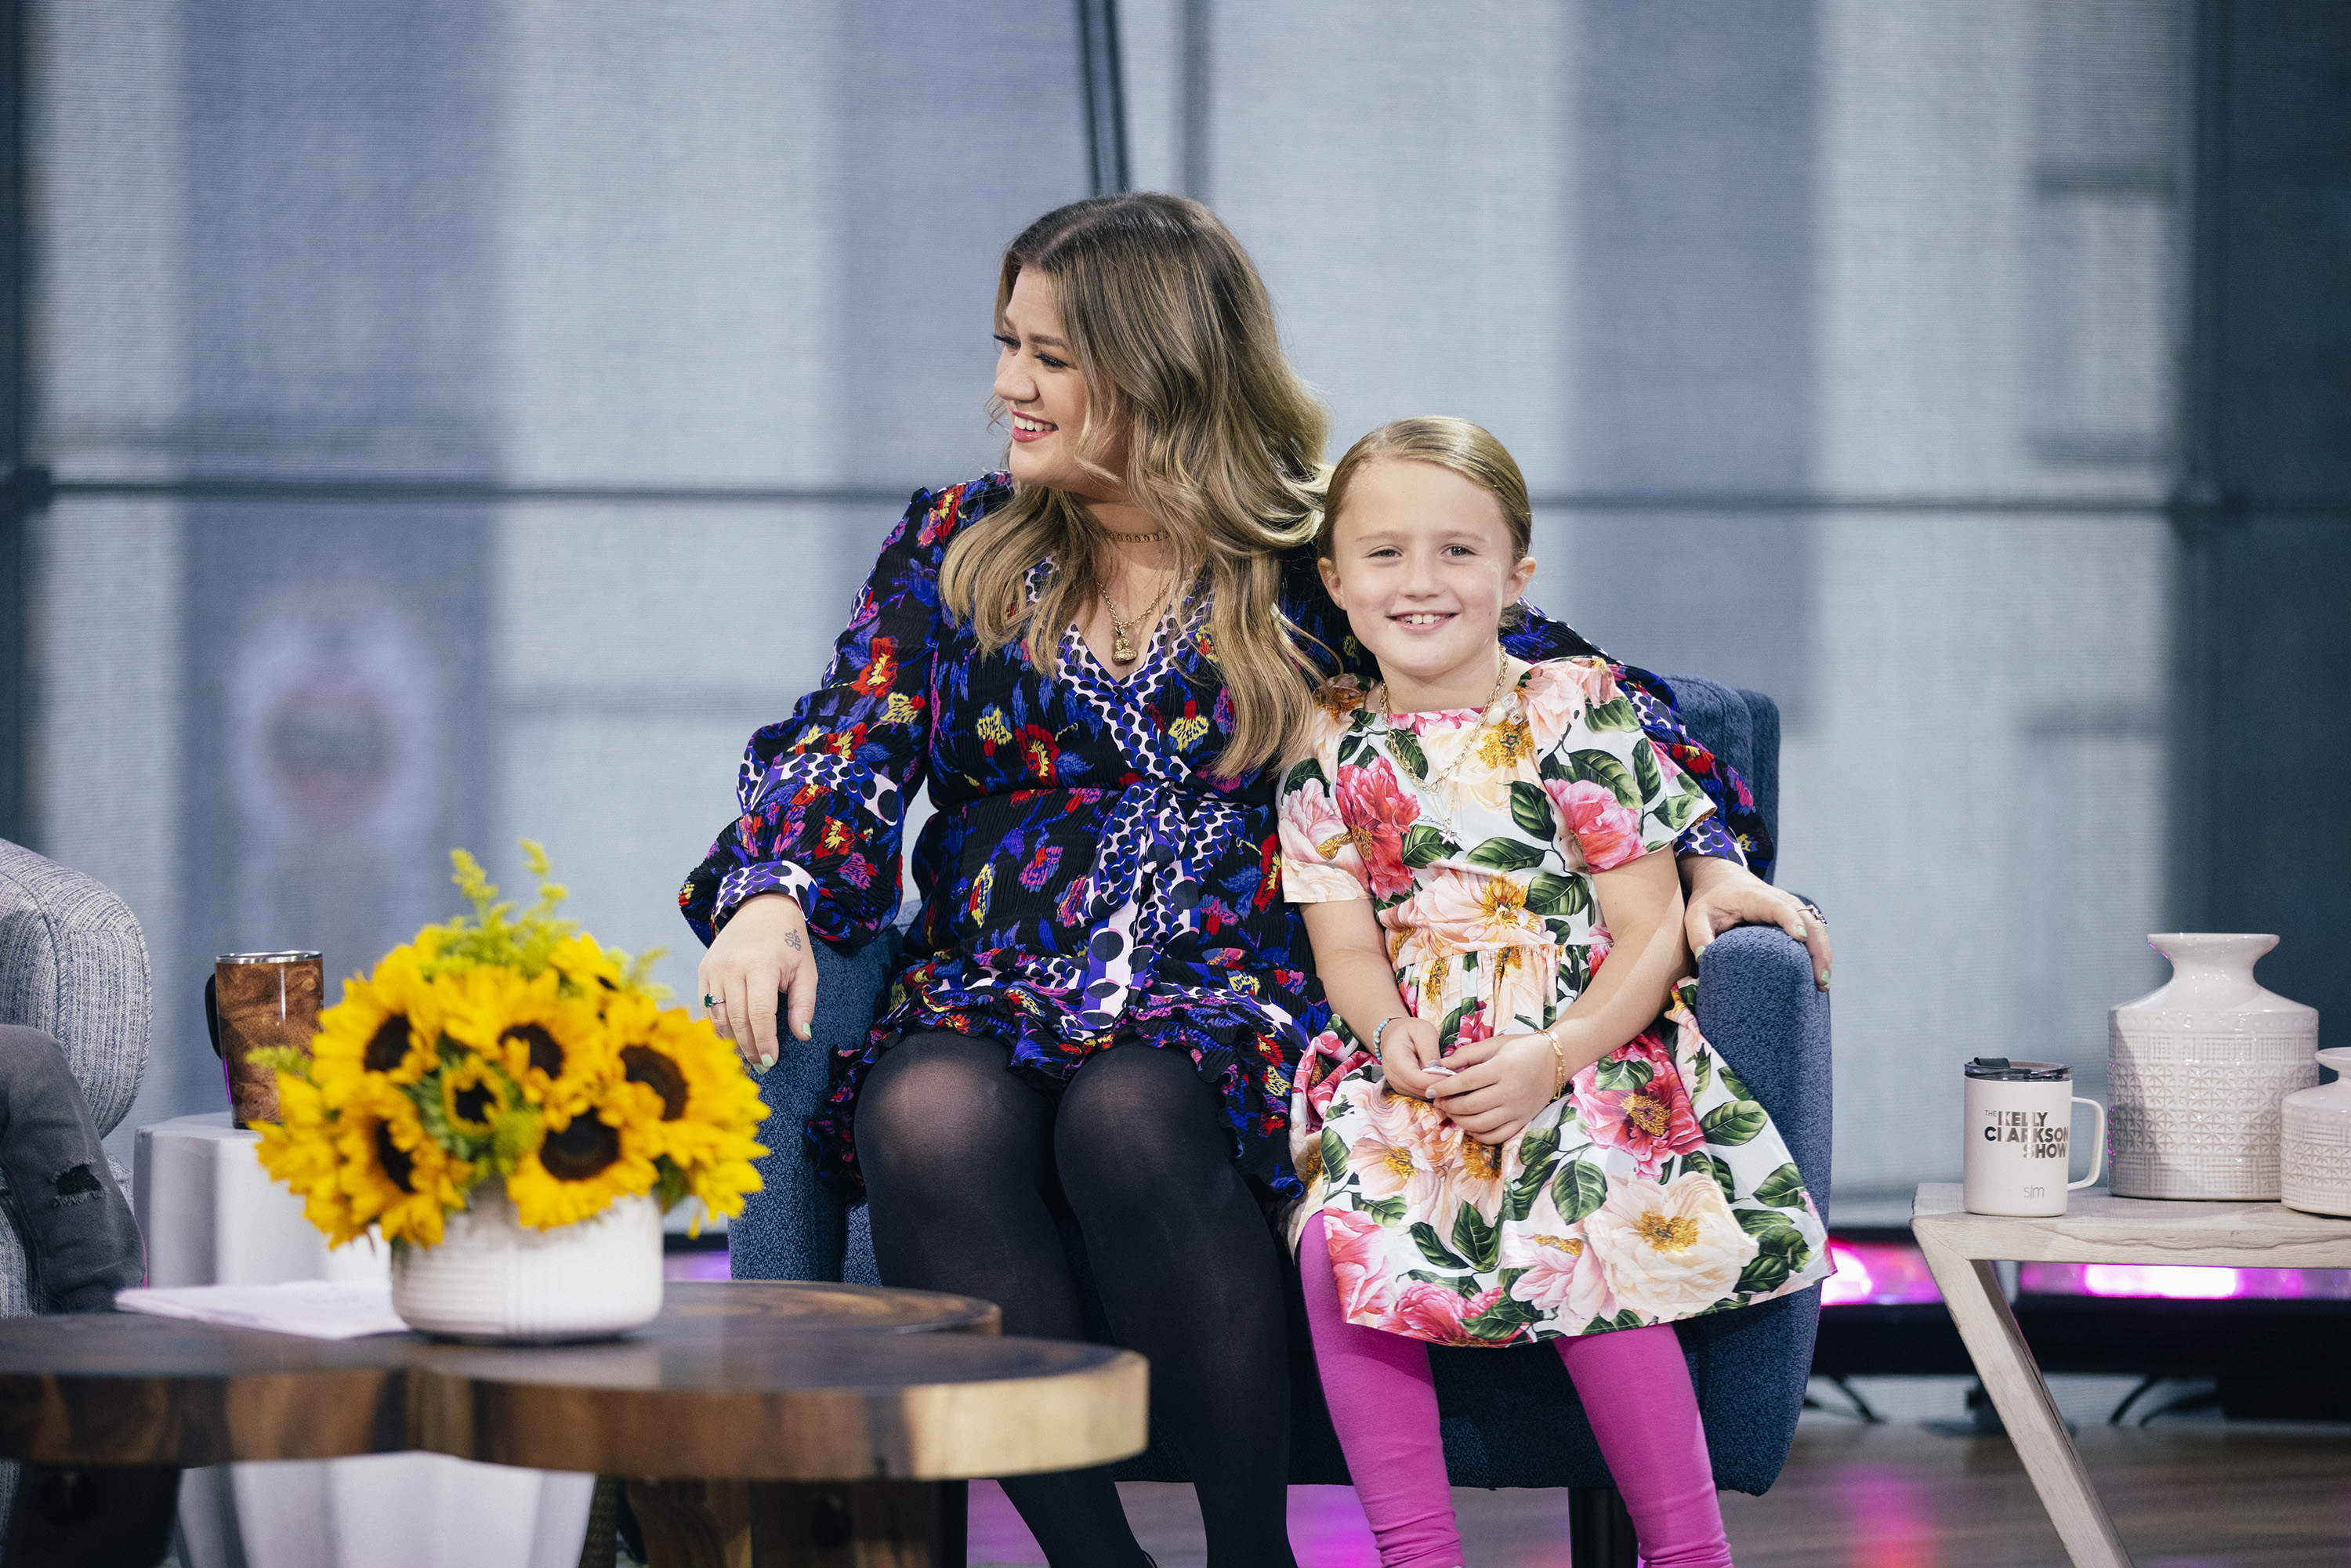 Kelly Clarkson and River Rose Blackstock during "The Kelly Clarkson Show" episode 1003 Season 3 on August 25, 2021. | Source: Getty Images